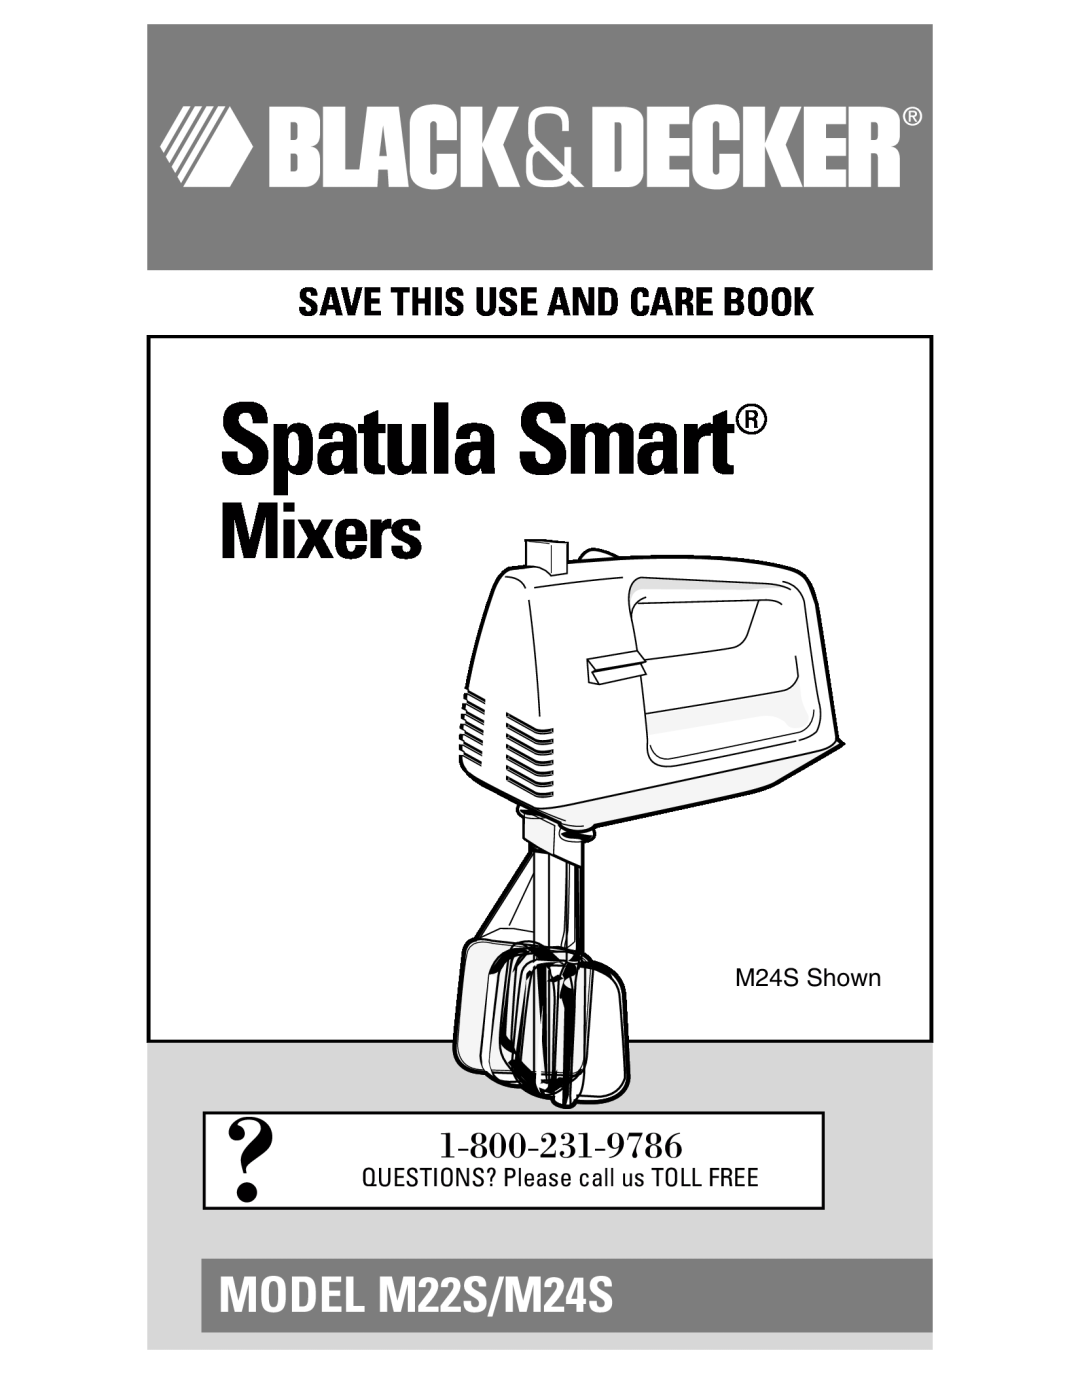 Black & Decker manual Spatula Smart, Mixers, MODEL M22S/M24S, Save This Use And Care Book 